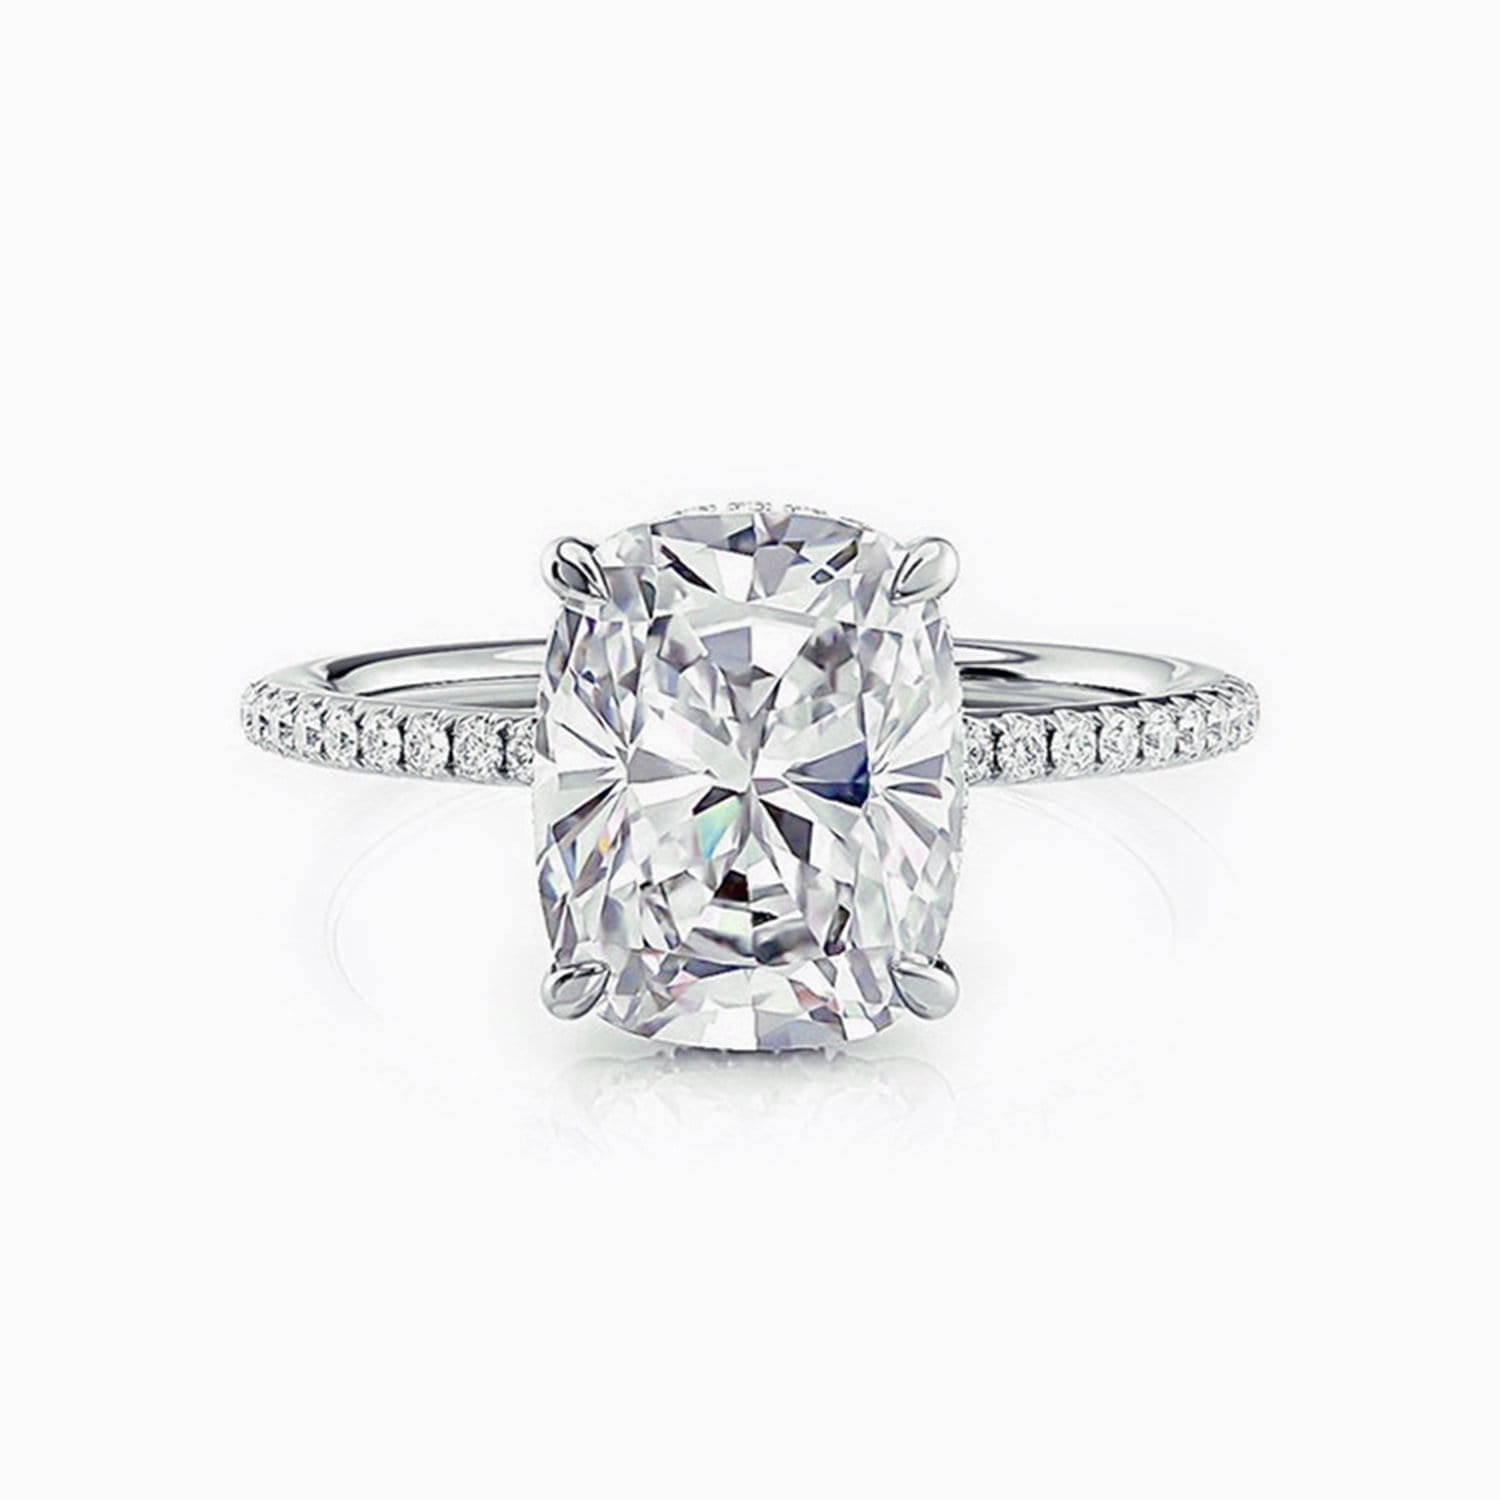 D Grade Promise Engagment Wedding Moissanite Rings Solitaire With Side Accents Stones 4.5 Carat Cushion Cut